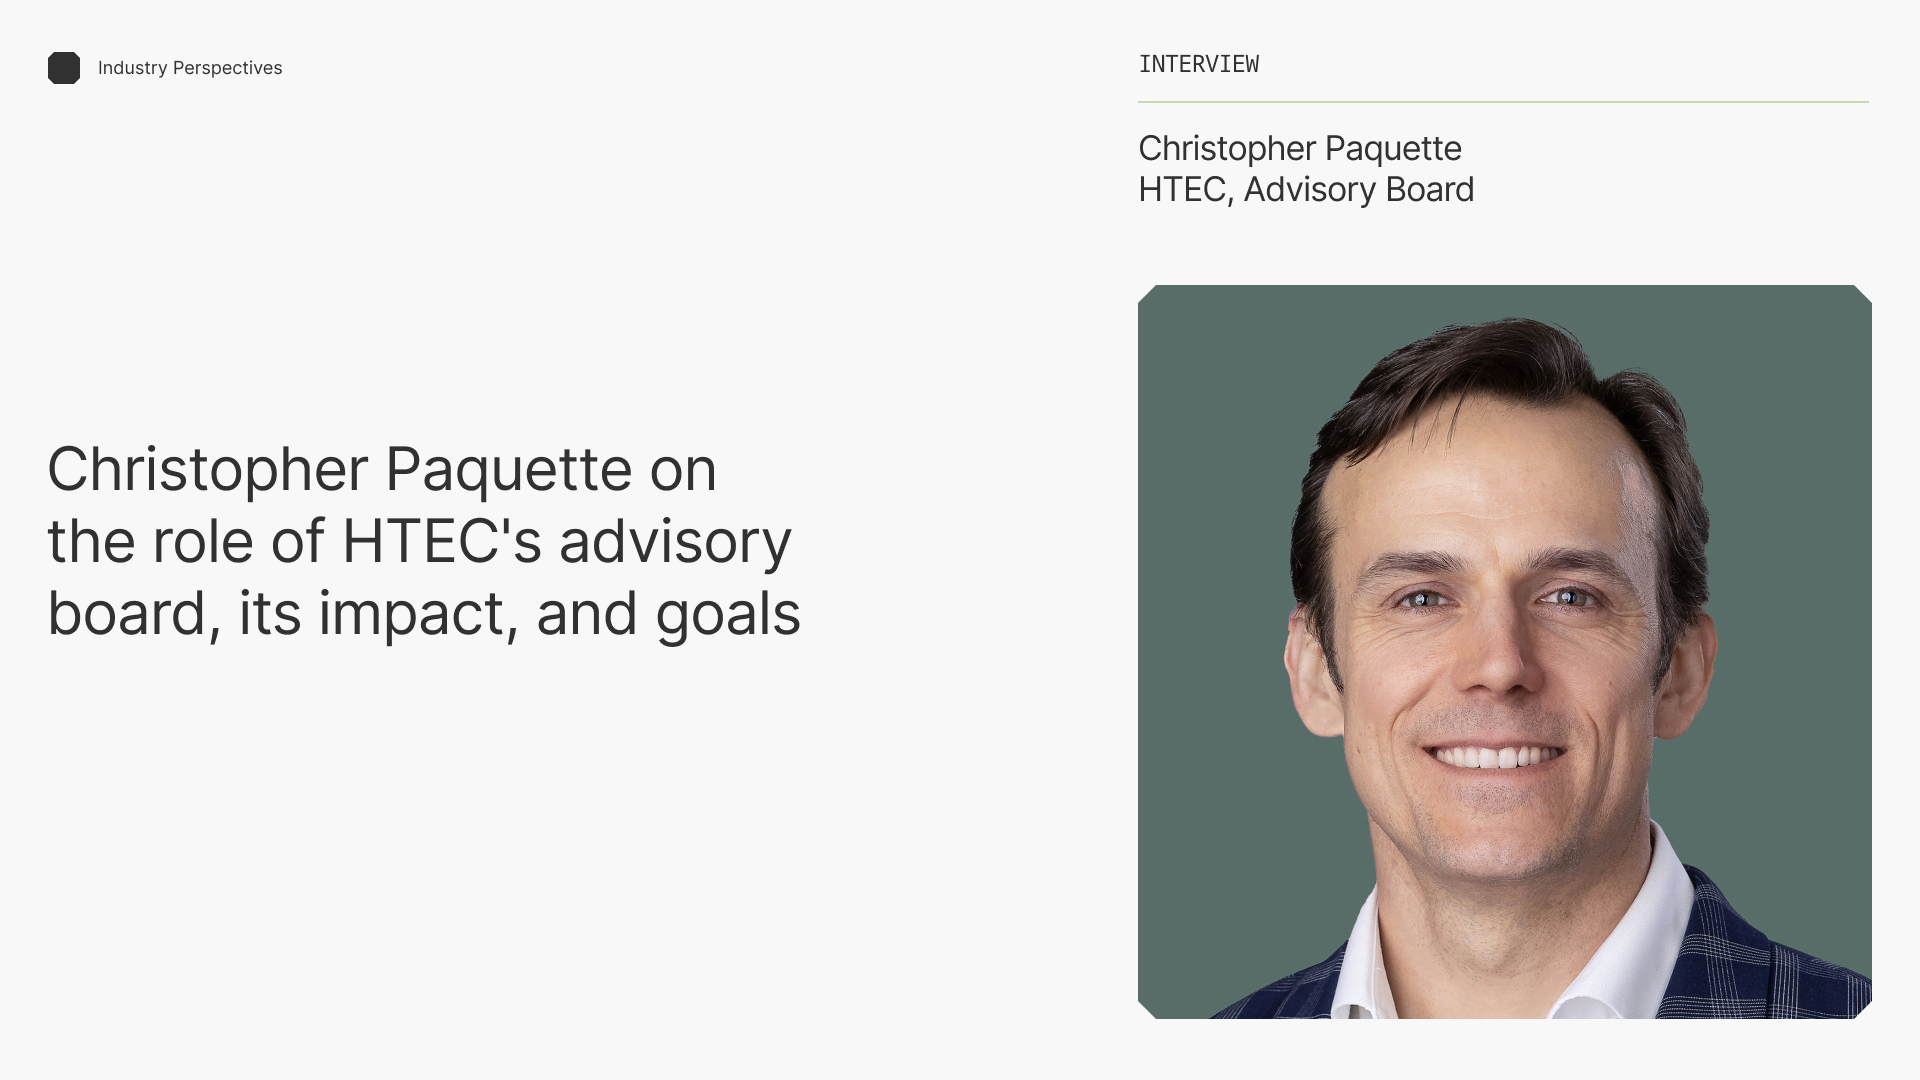 Former McKinsey partner Christopher Paquette on making an impact with the HTEC Advisory Board